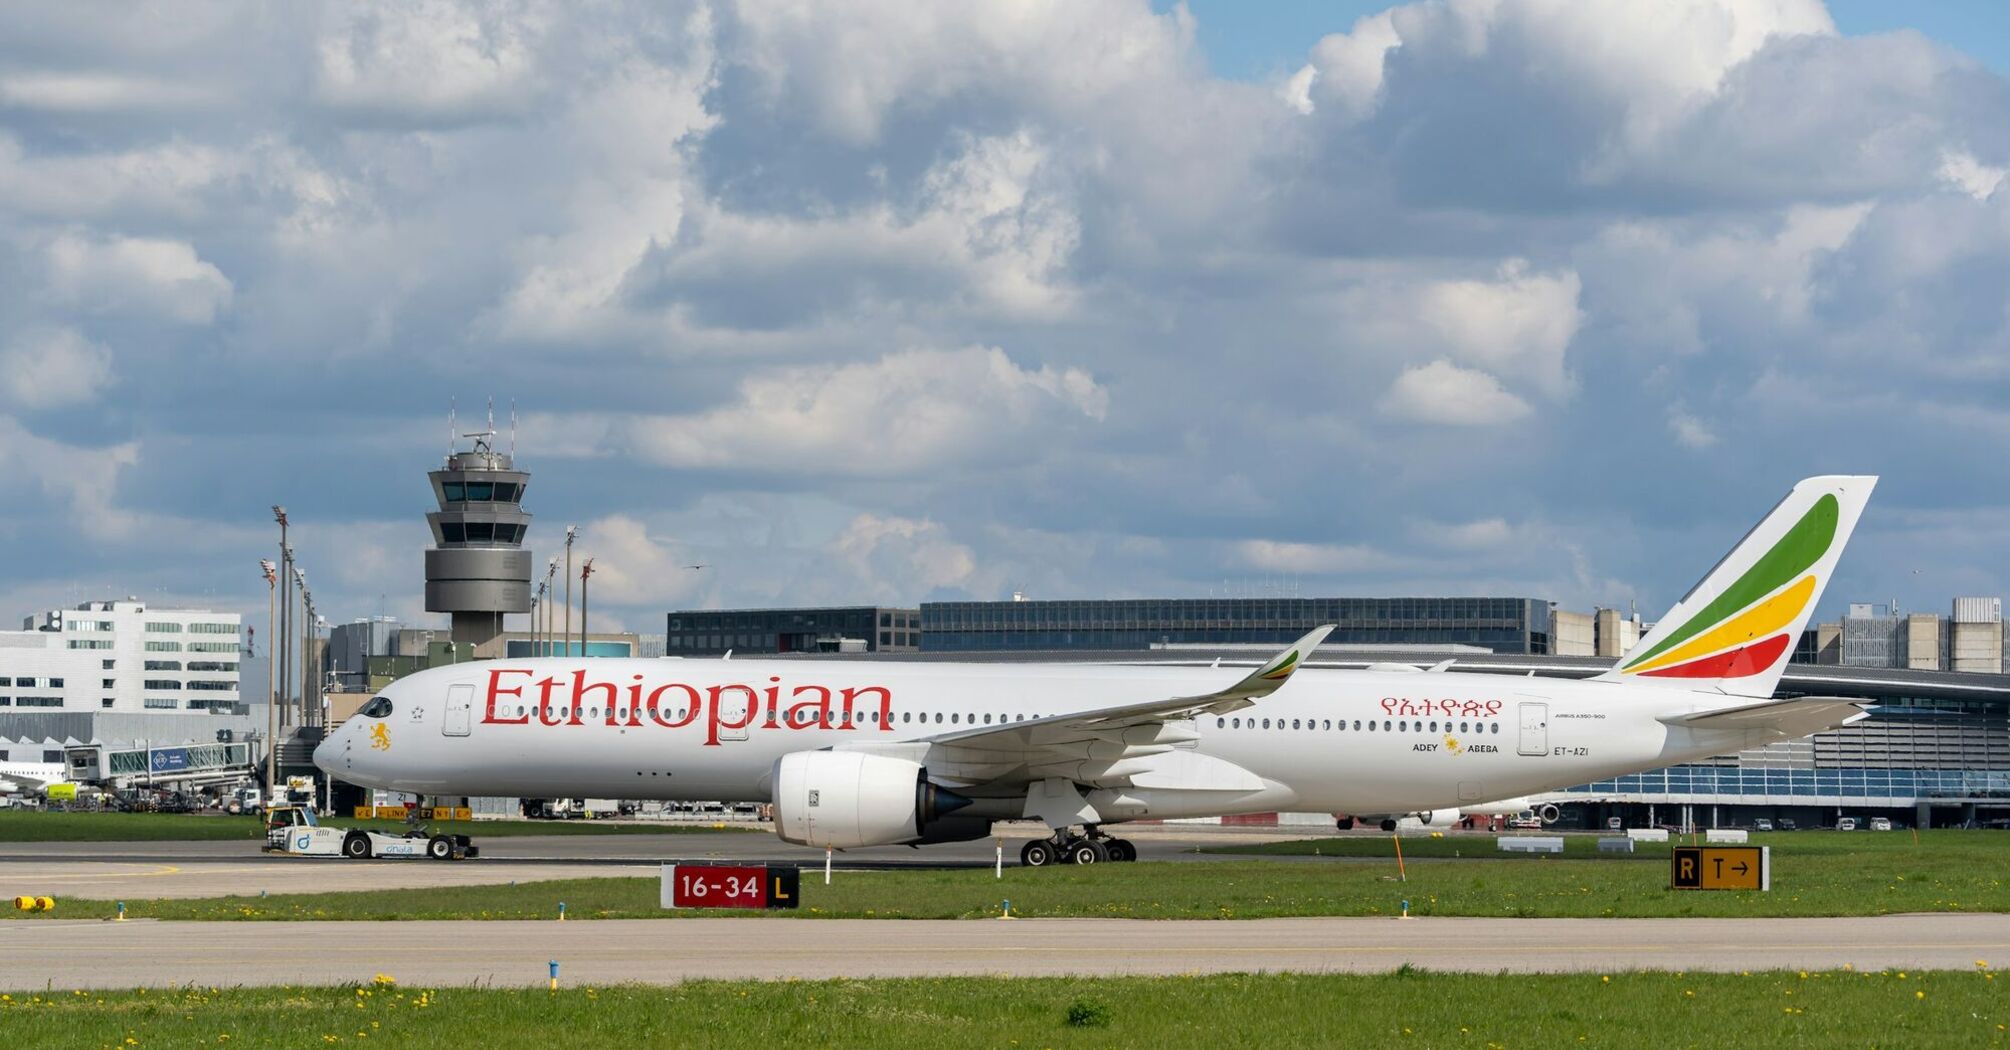 Ethiopian Airlines plane at the runway